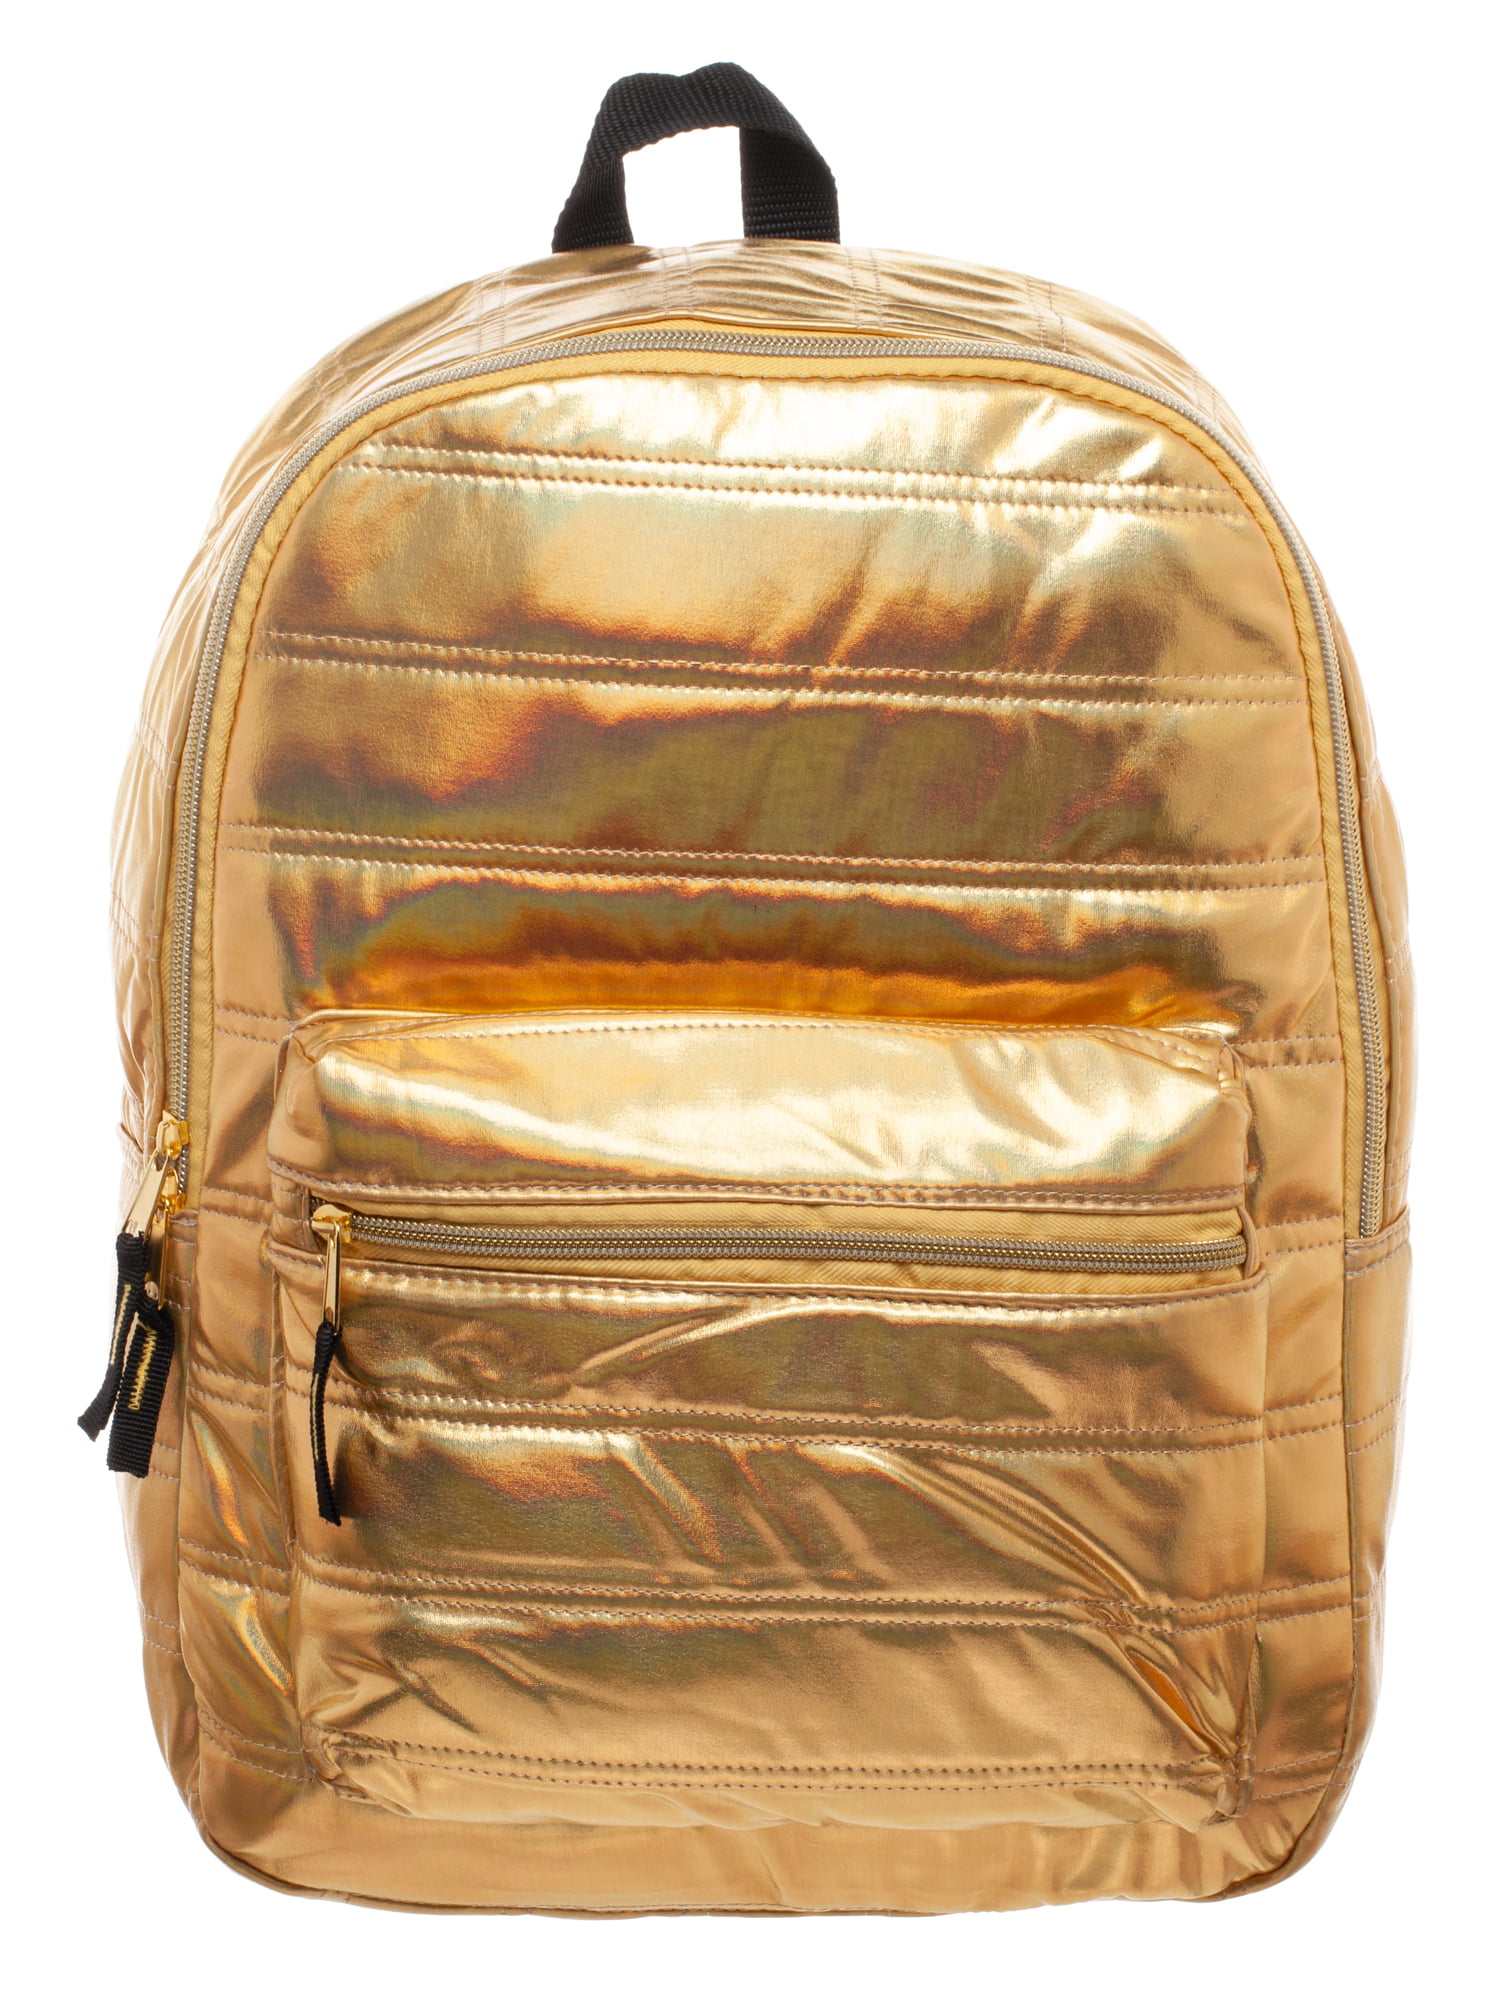 Gold Metallic Quilted 16inch backpack - Walmart.com